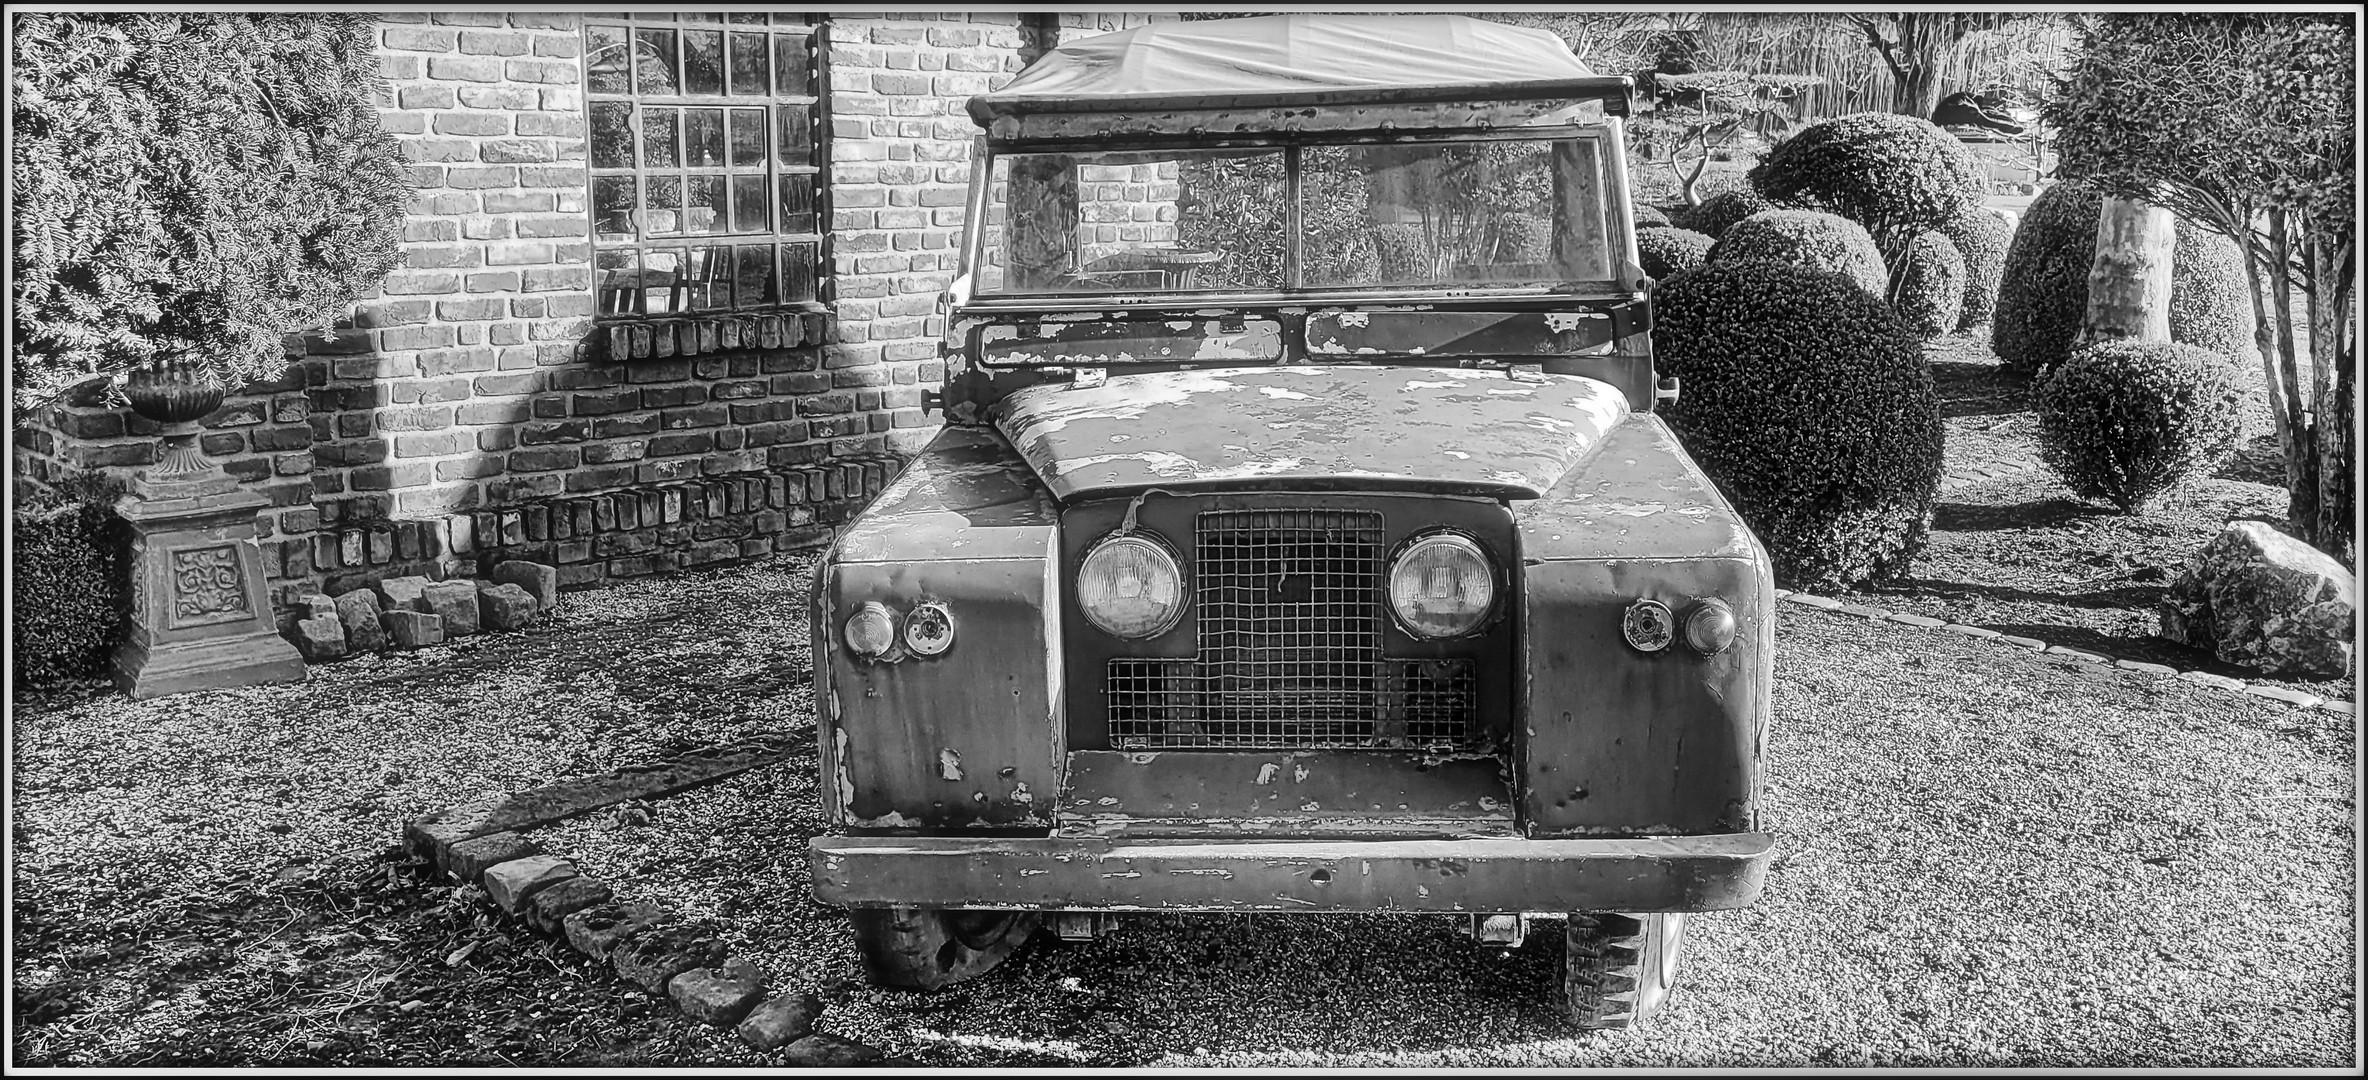 Land Rover b)  - Rost in peace